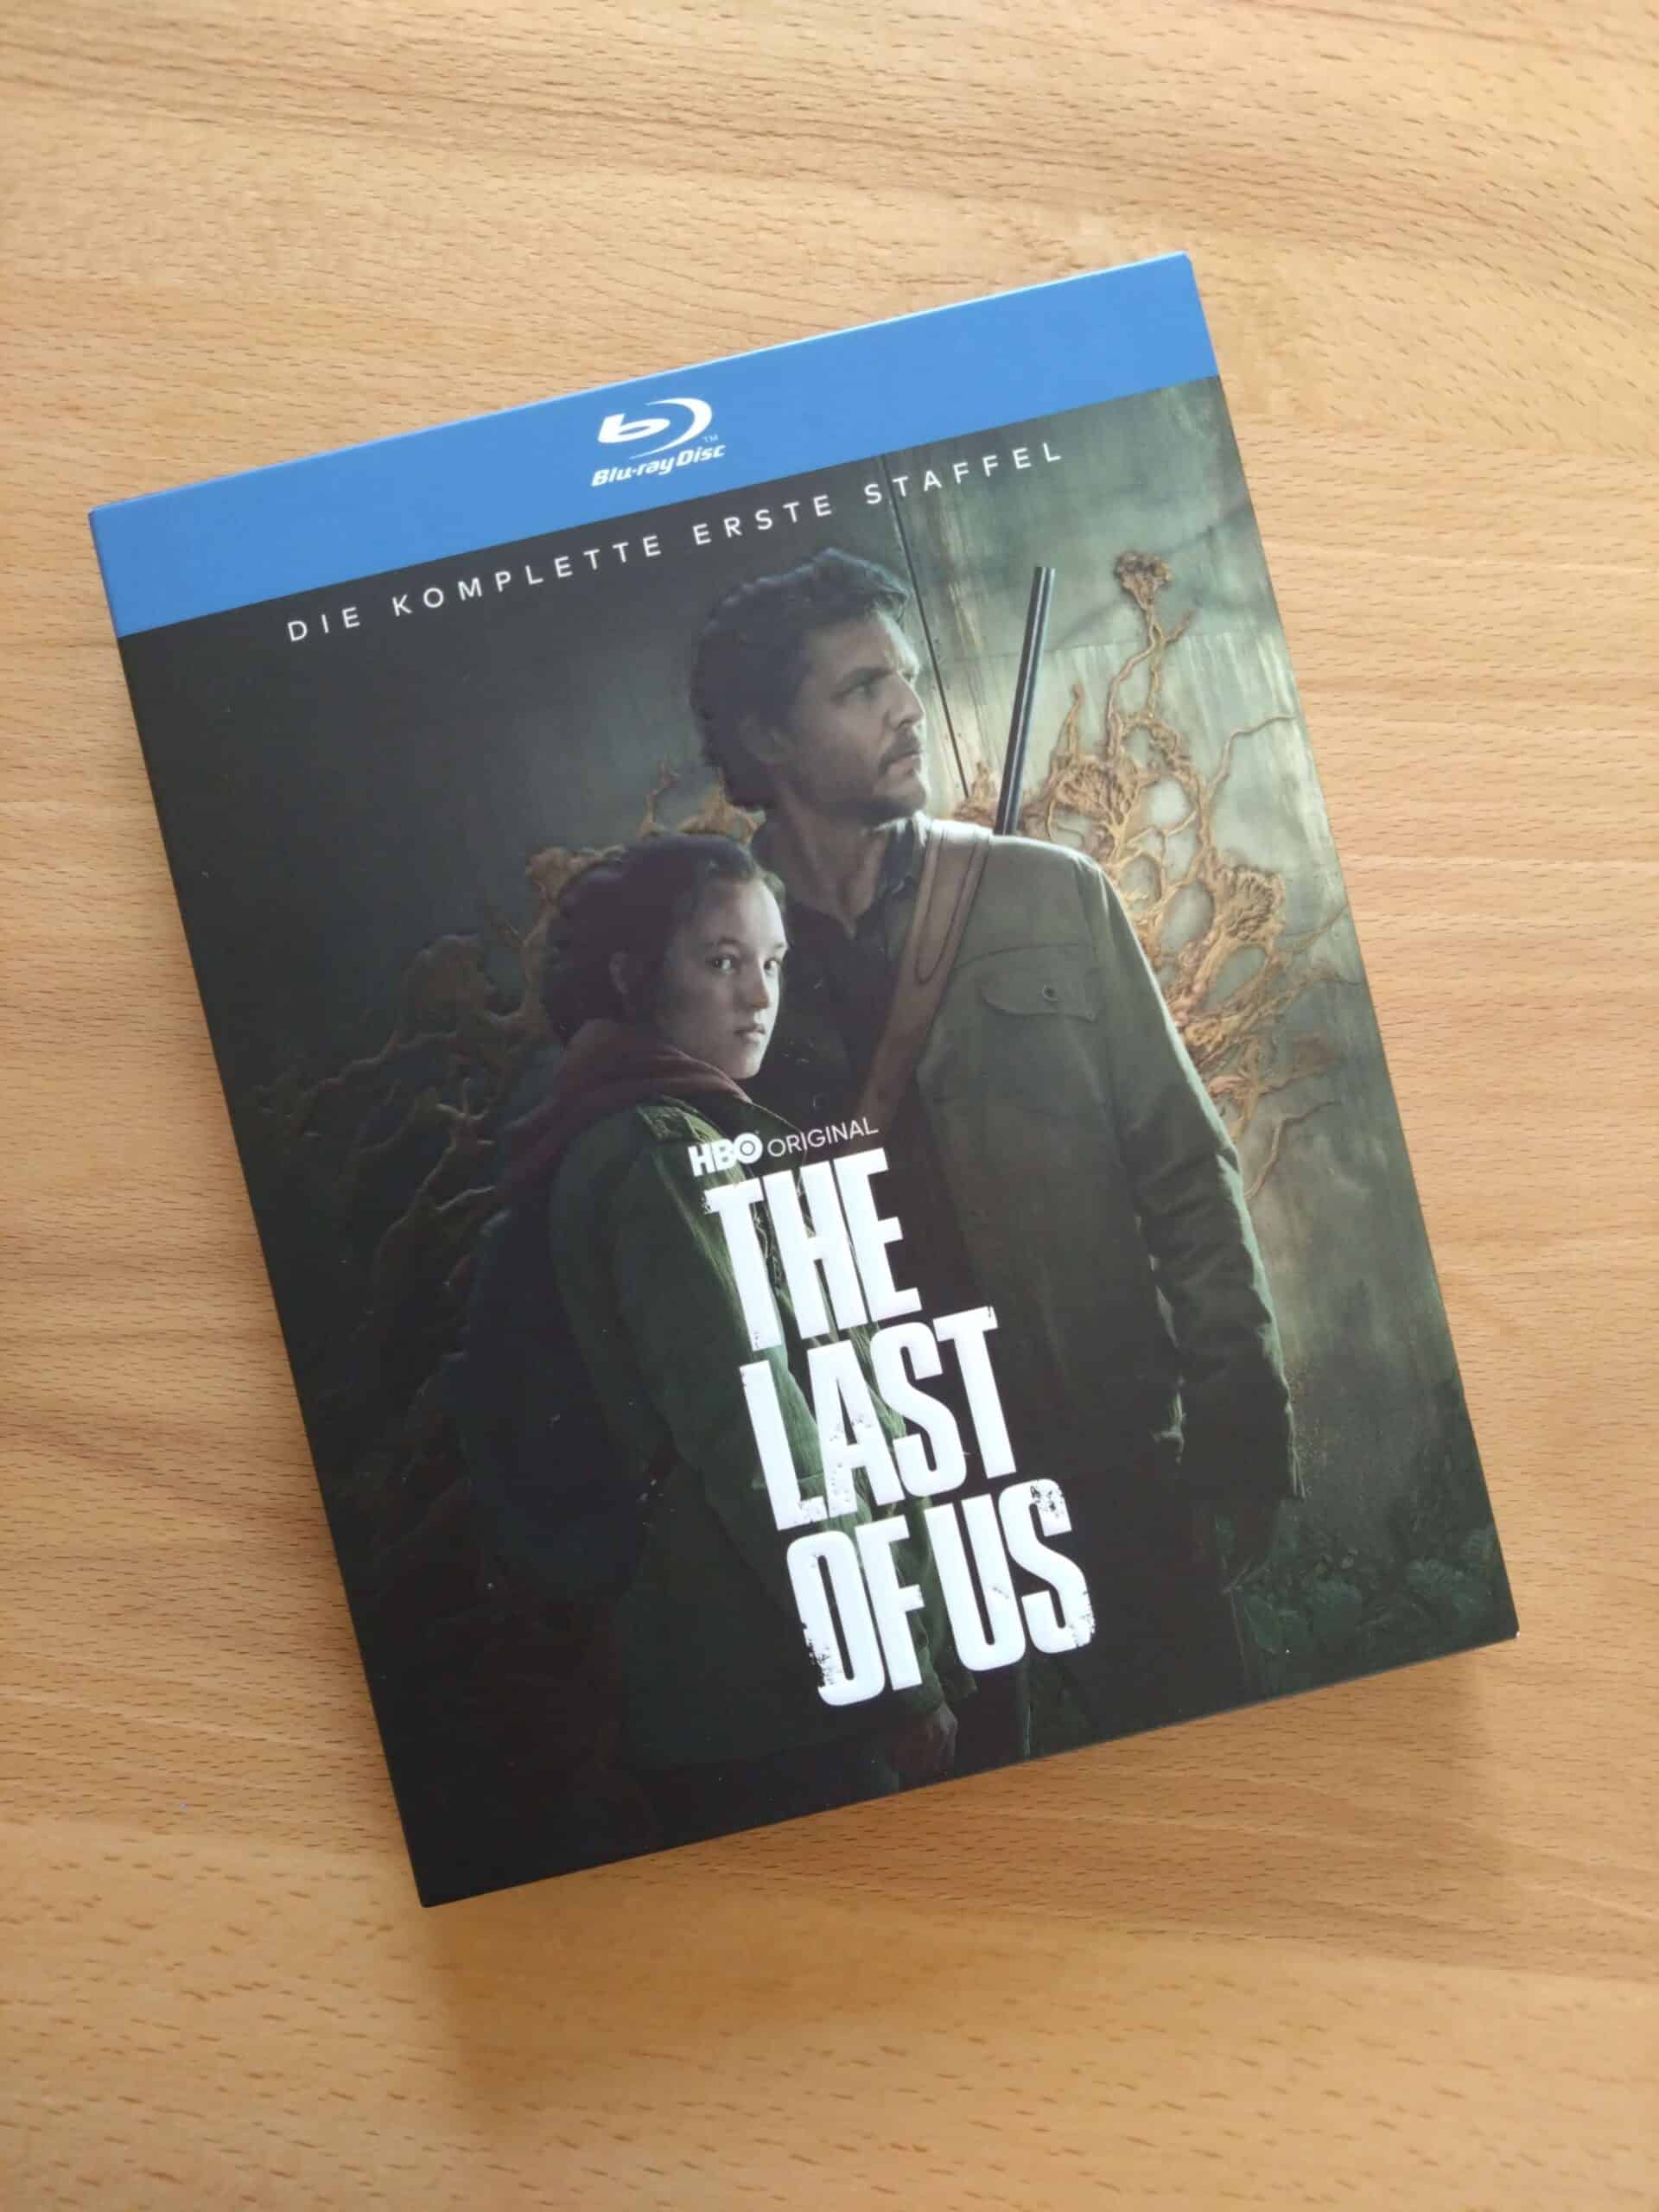 [Review] The Last of Us – Staffel 1 (Blu-ray Amaray)